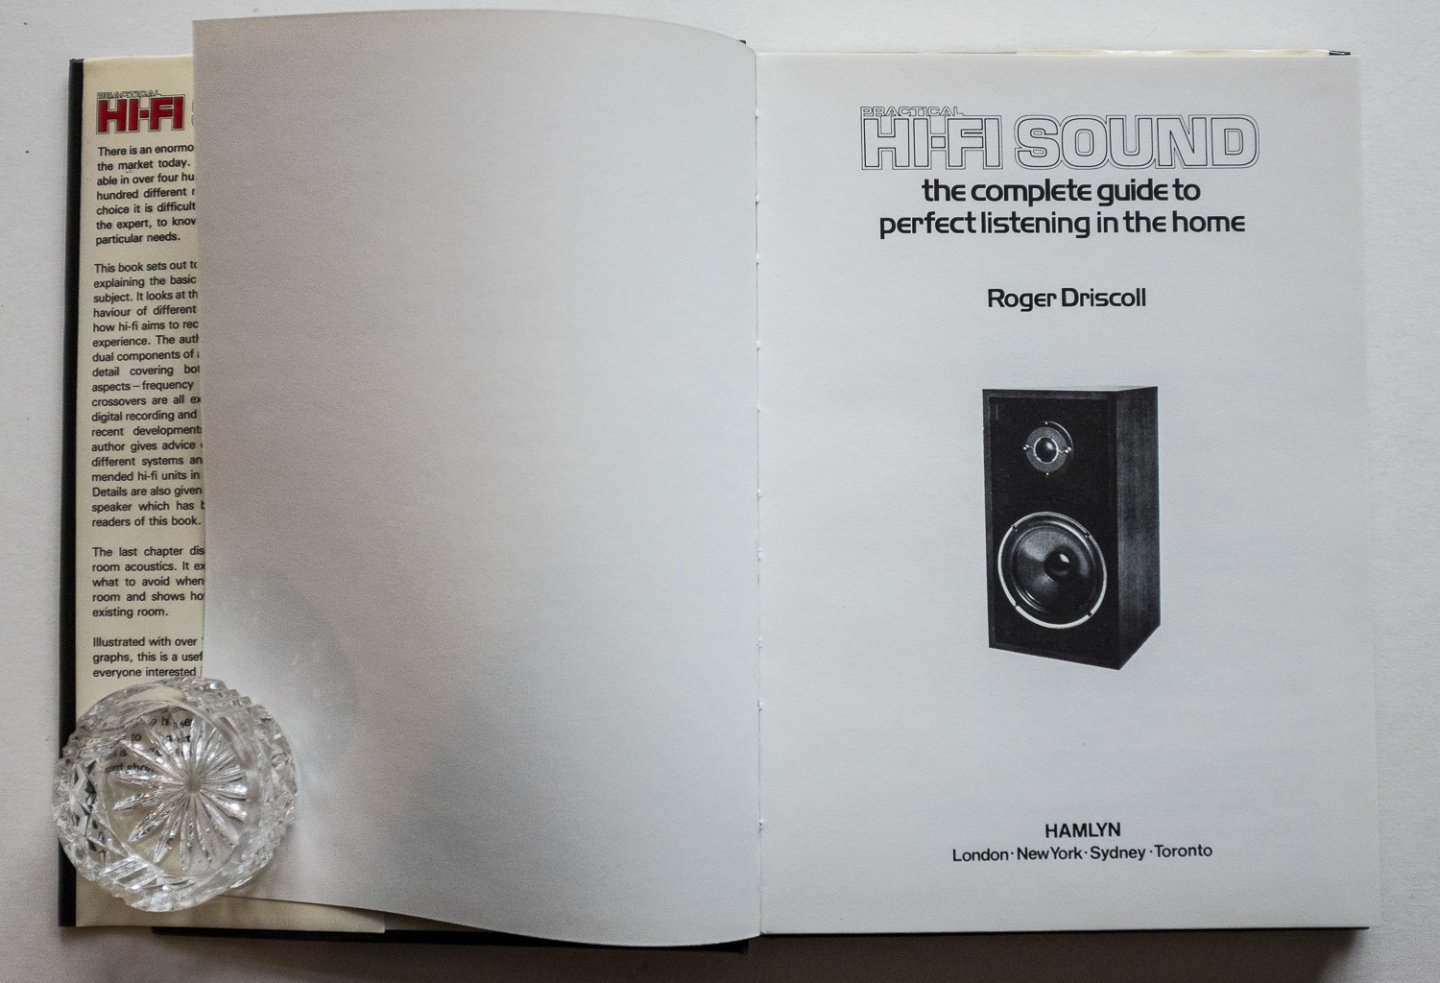 Driscoll, Roger - Practical hi-fi sound : the complete guide to perfect listening in the home